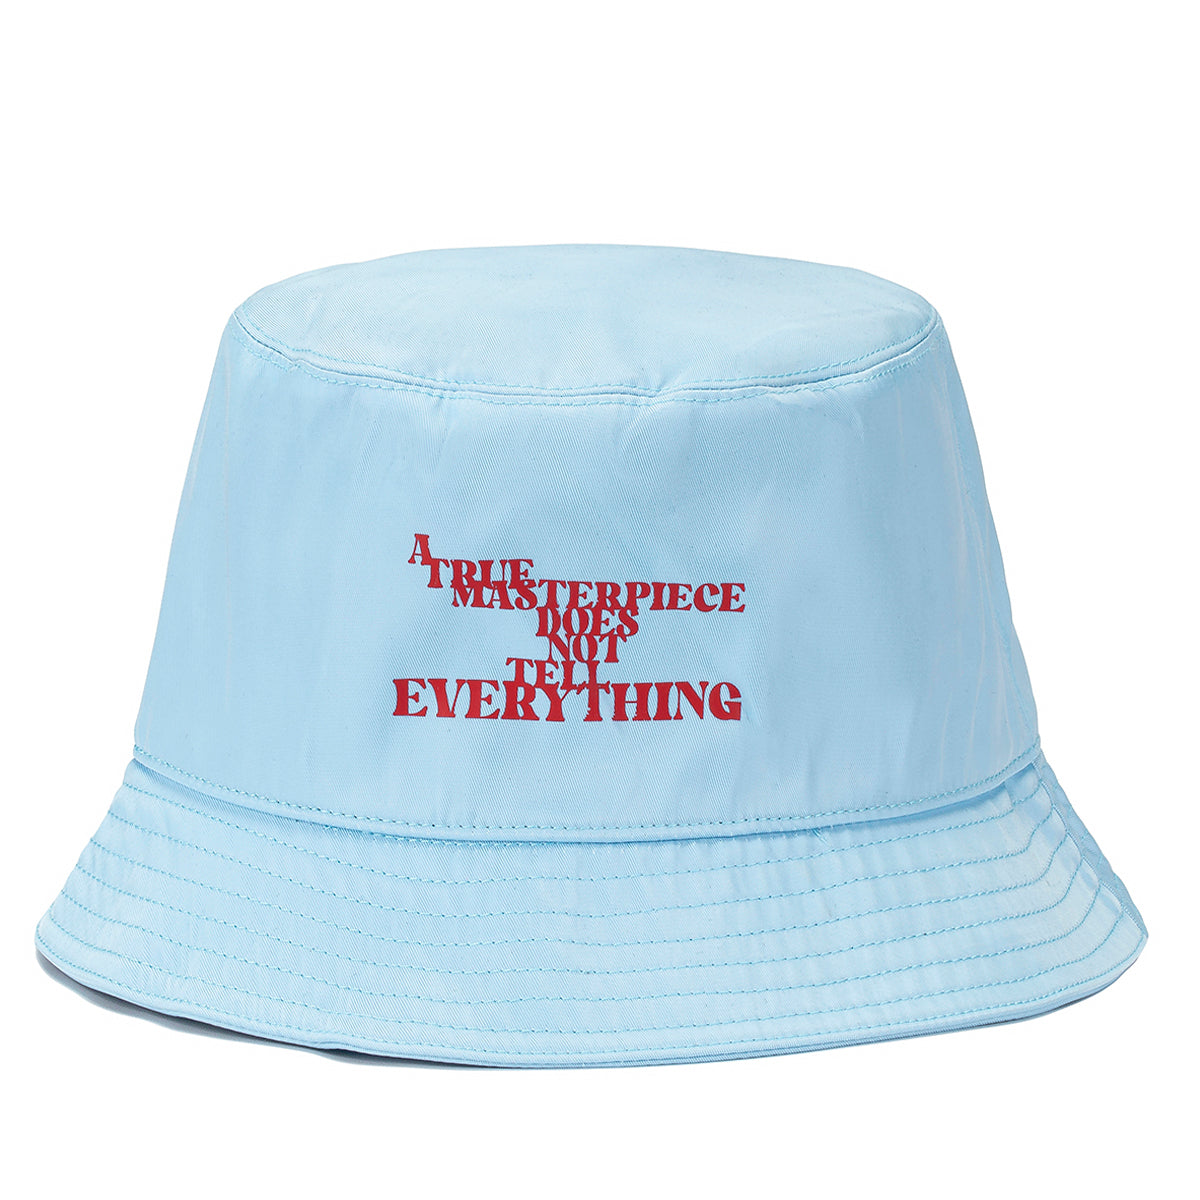 A True Masterpiece Does Not Tell Everything Bucket Hat baby blue